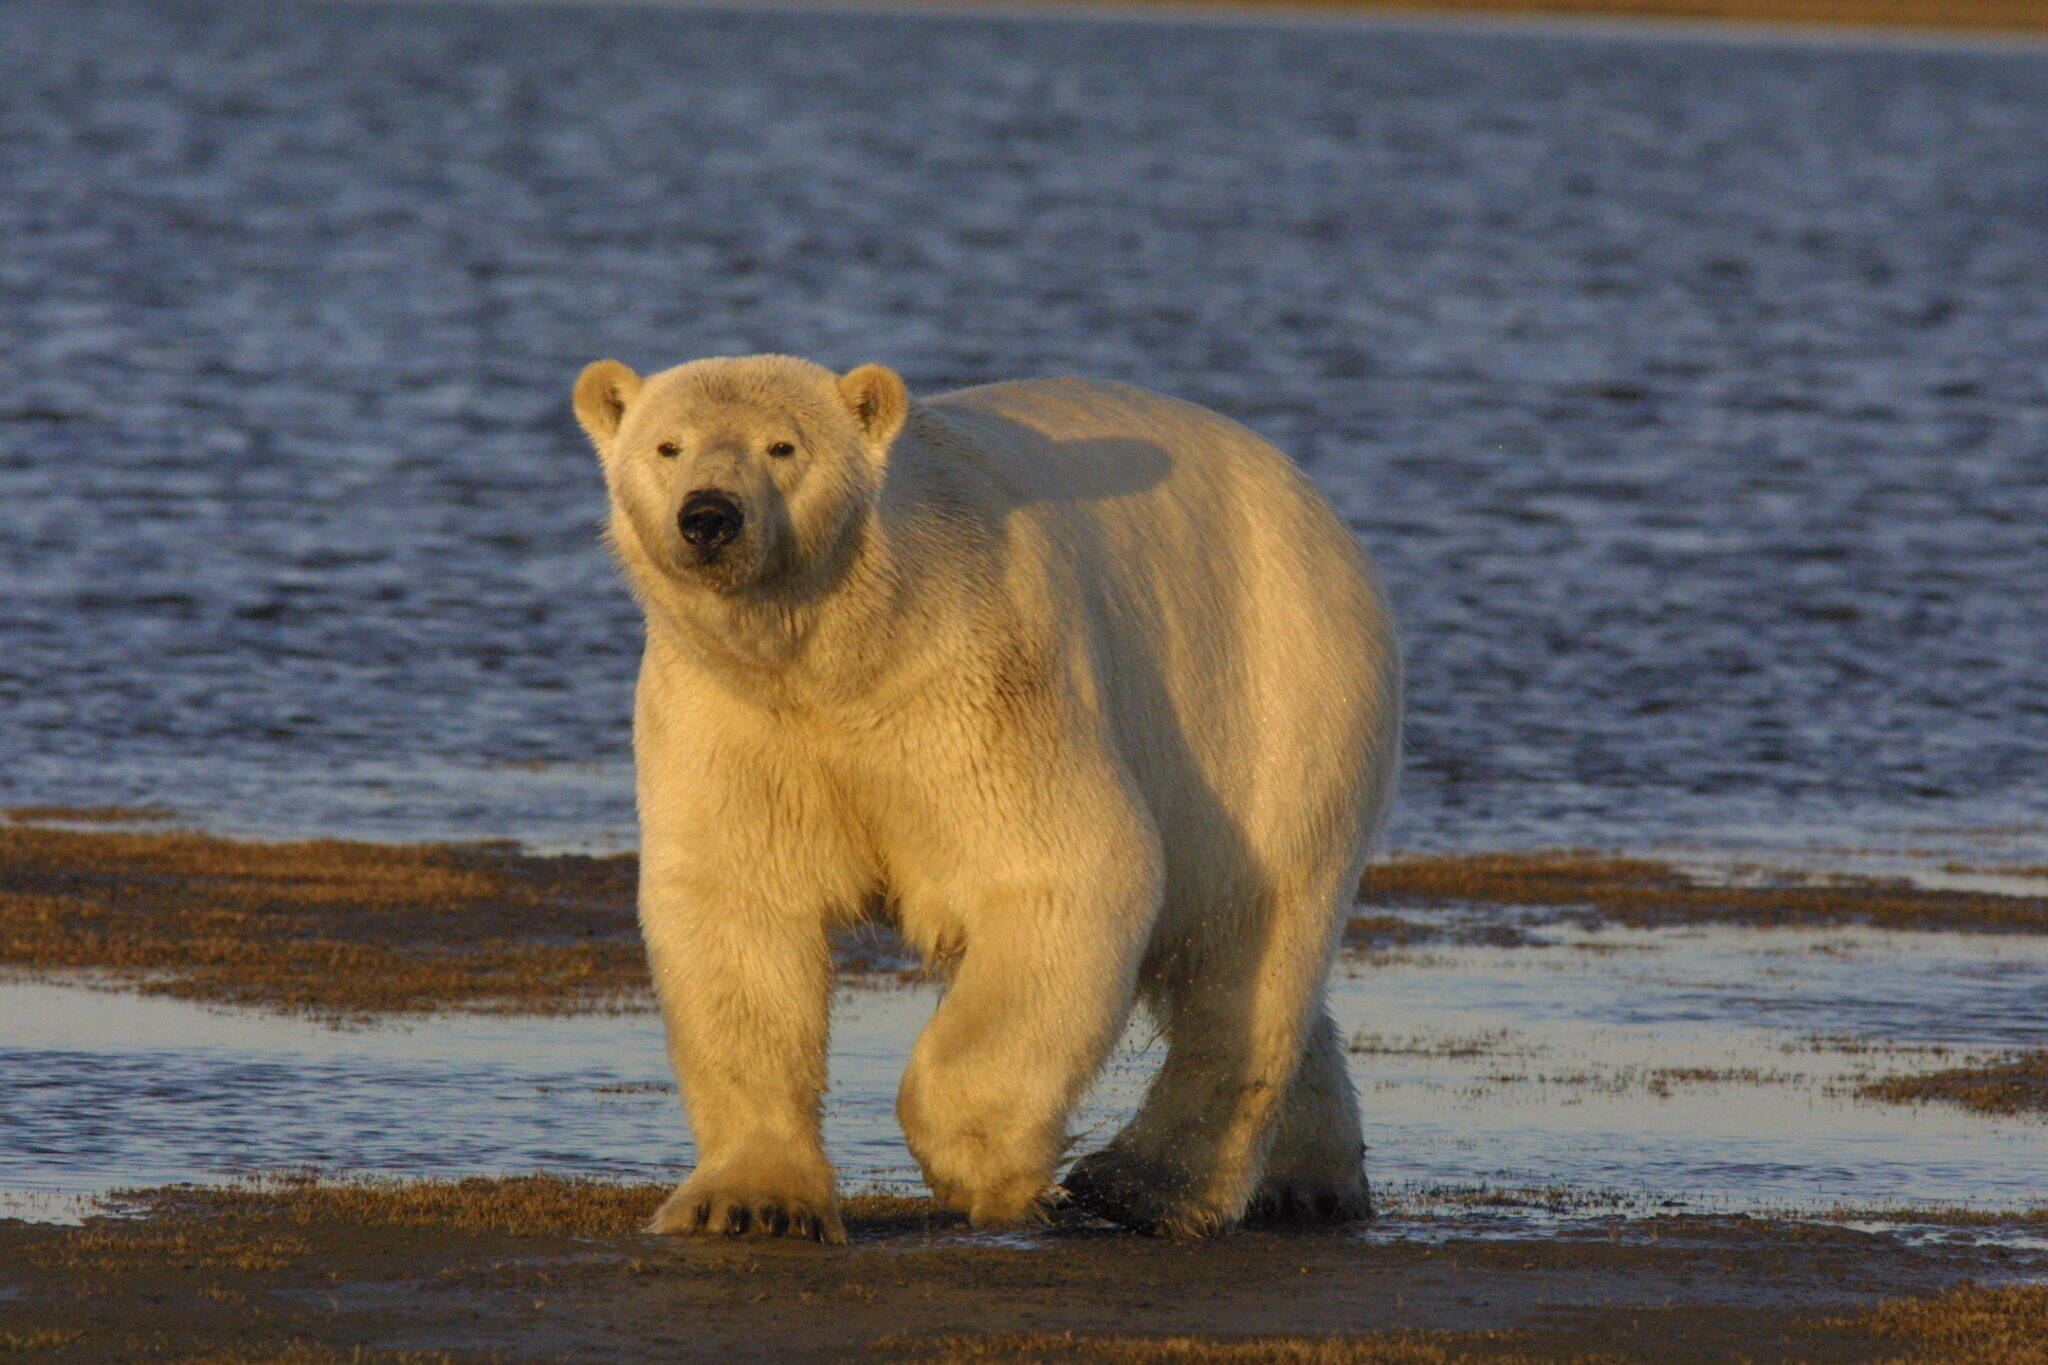 A polar bear walks along the shore in Alaska on Sept. 6, 2019. A different animal discovered dead in October near Utqiagvik is now confirmed to be the world’s first documented case of highly pathogenic avian influenza in a polar bear.(Photo provided by U.S. Fish and Wildlife Service)